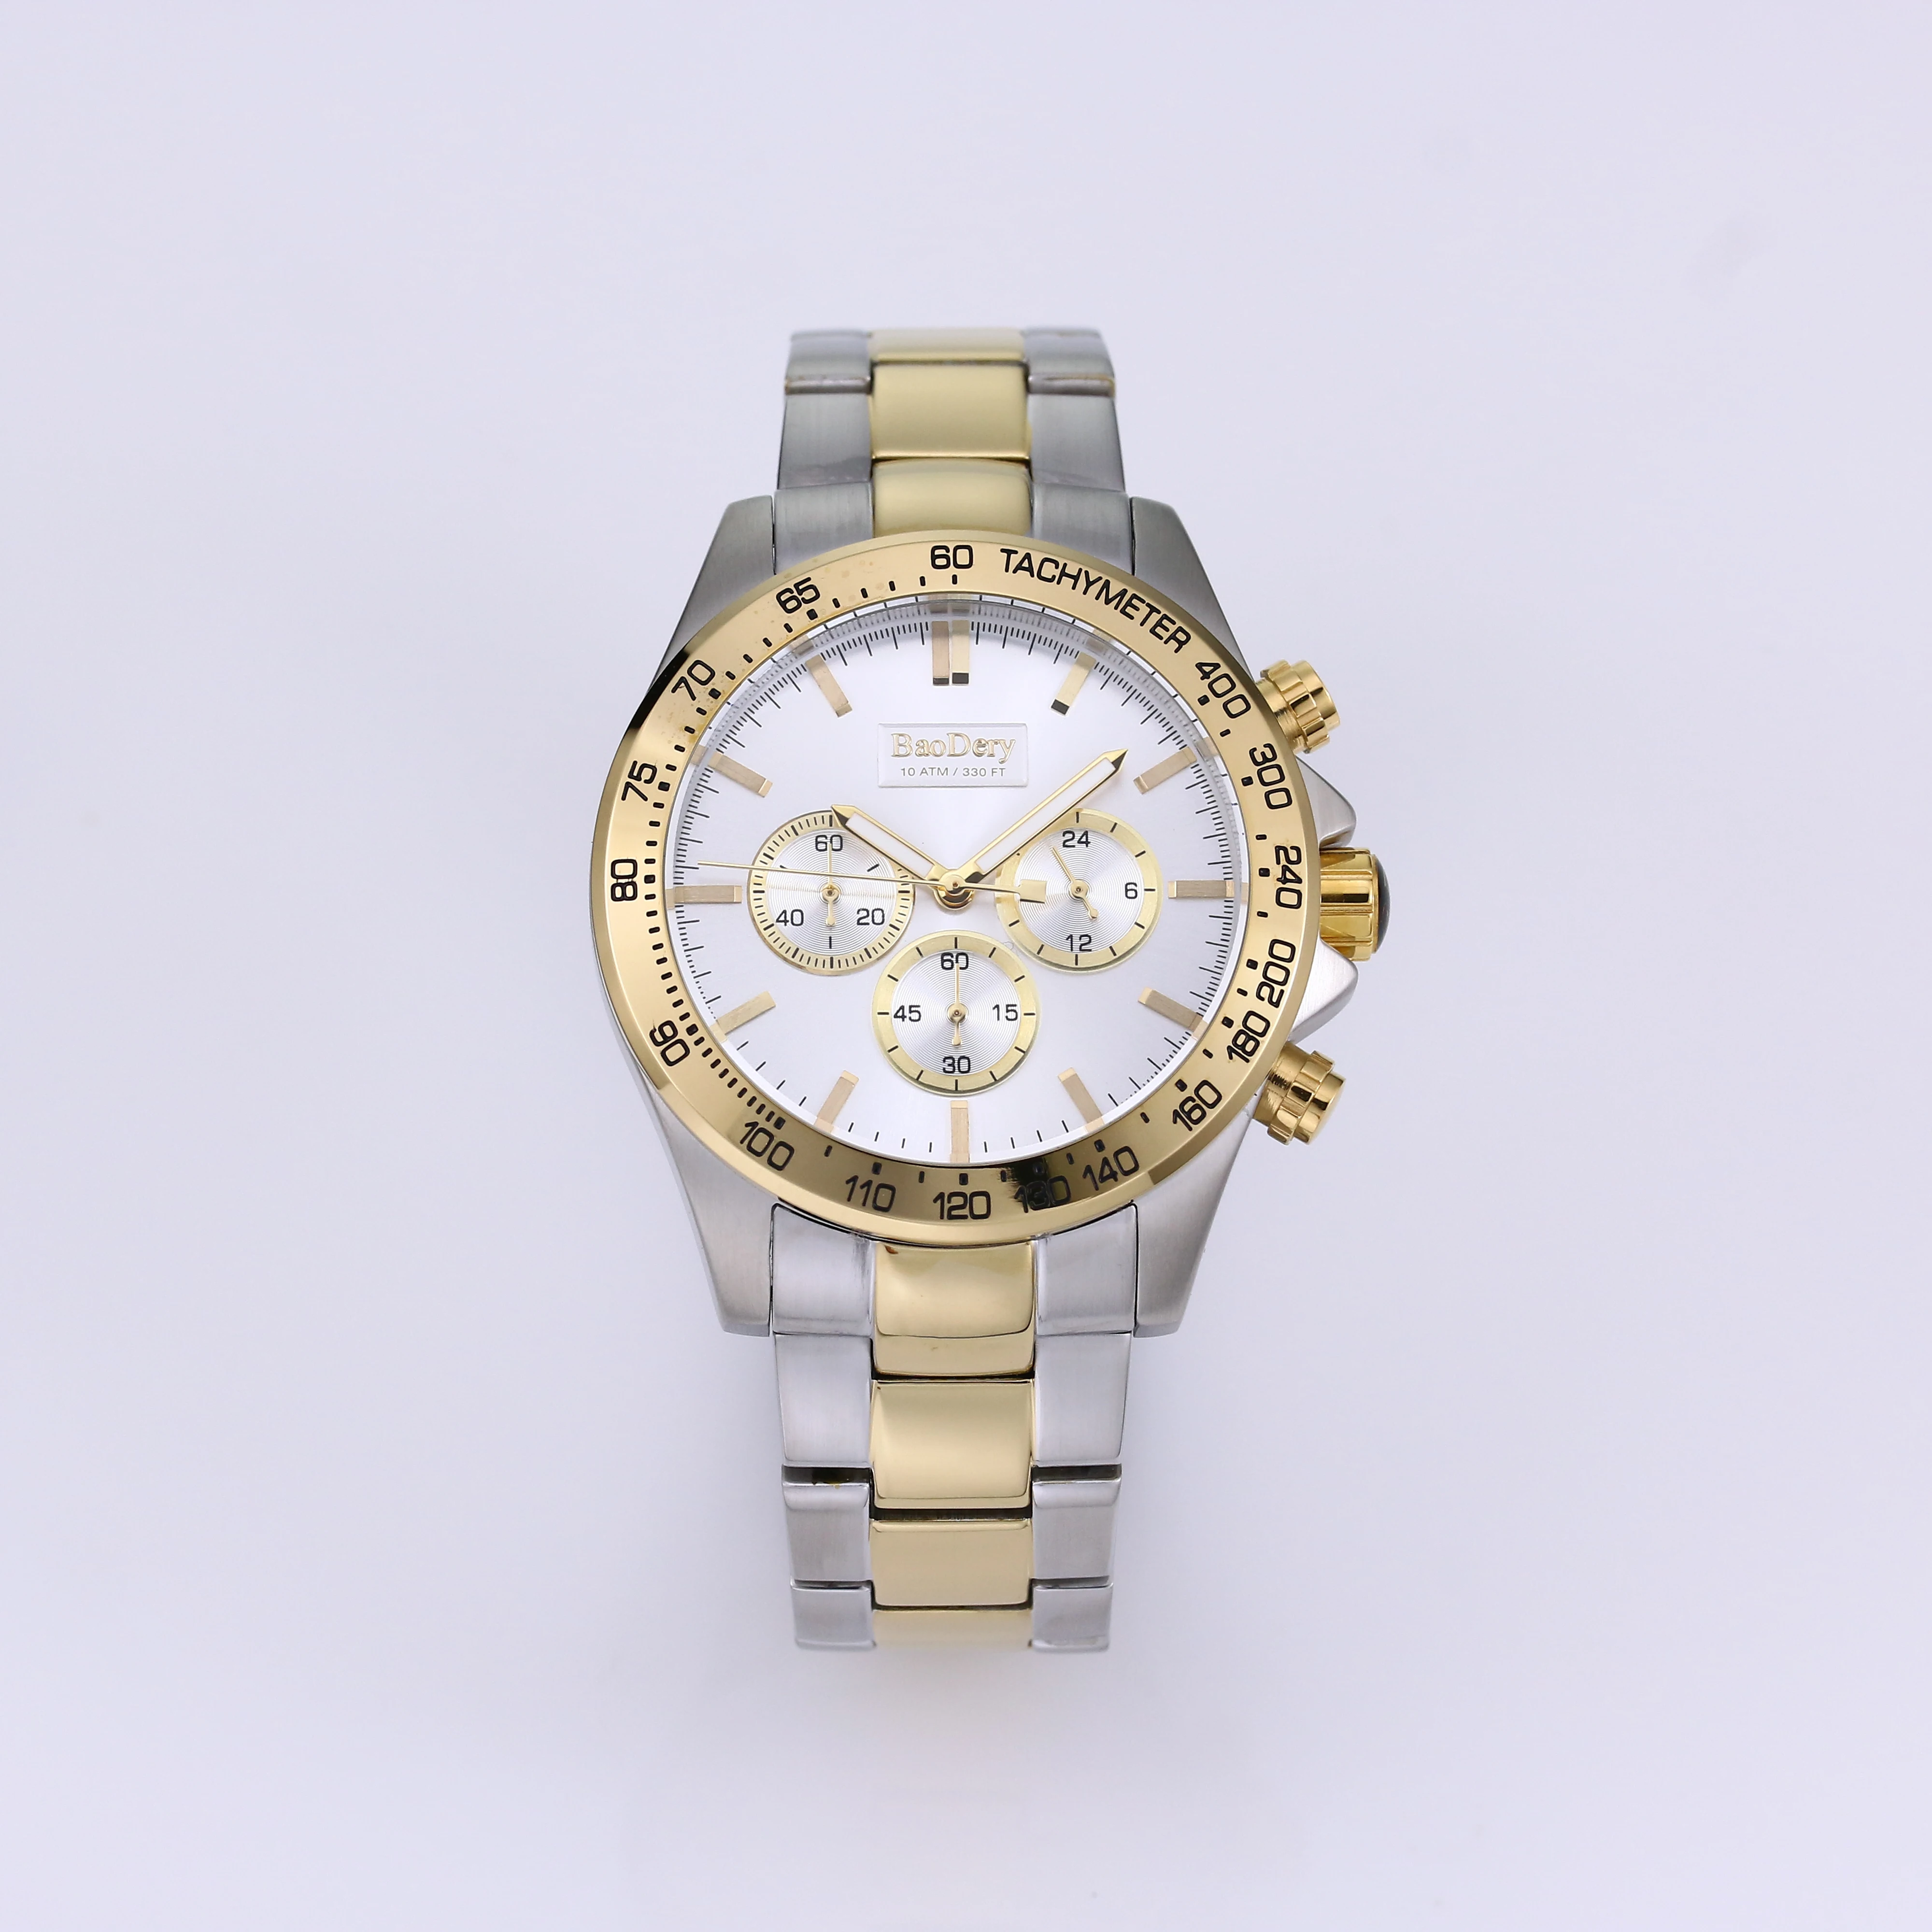 

Subtly Refined, Clearly Precise - This 43mm Men's Watch with White Dial, Steel Band and Golden Trim!